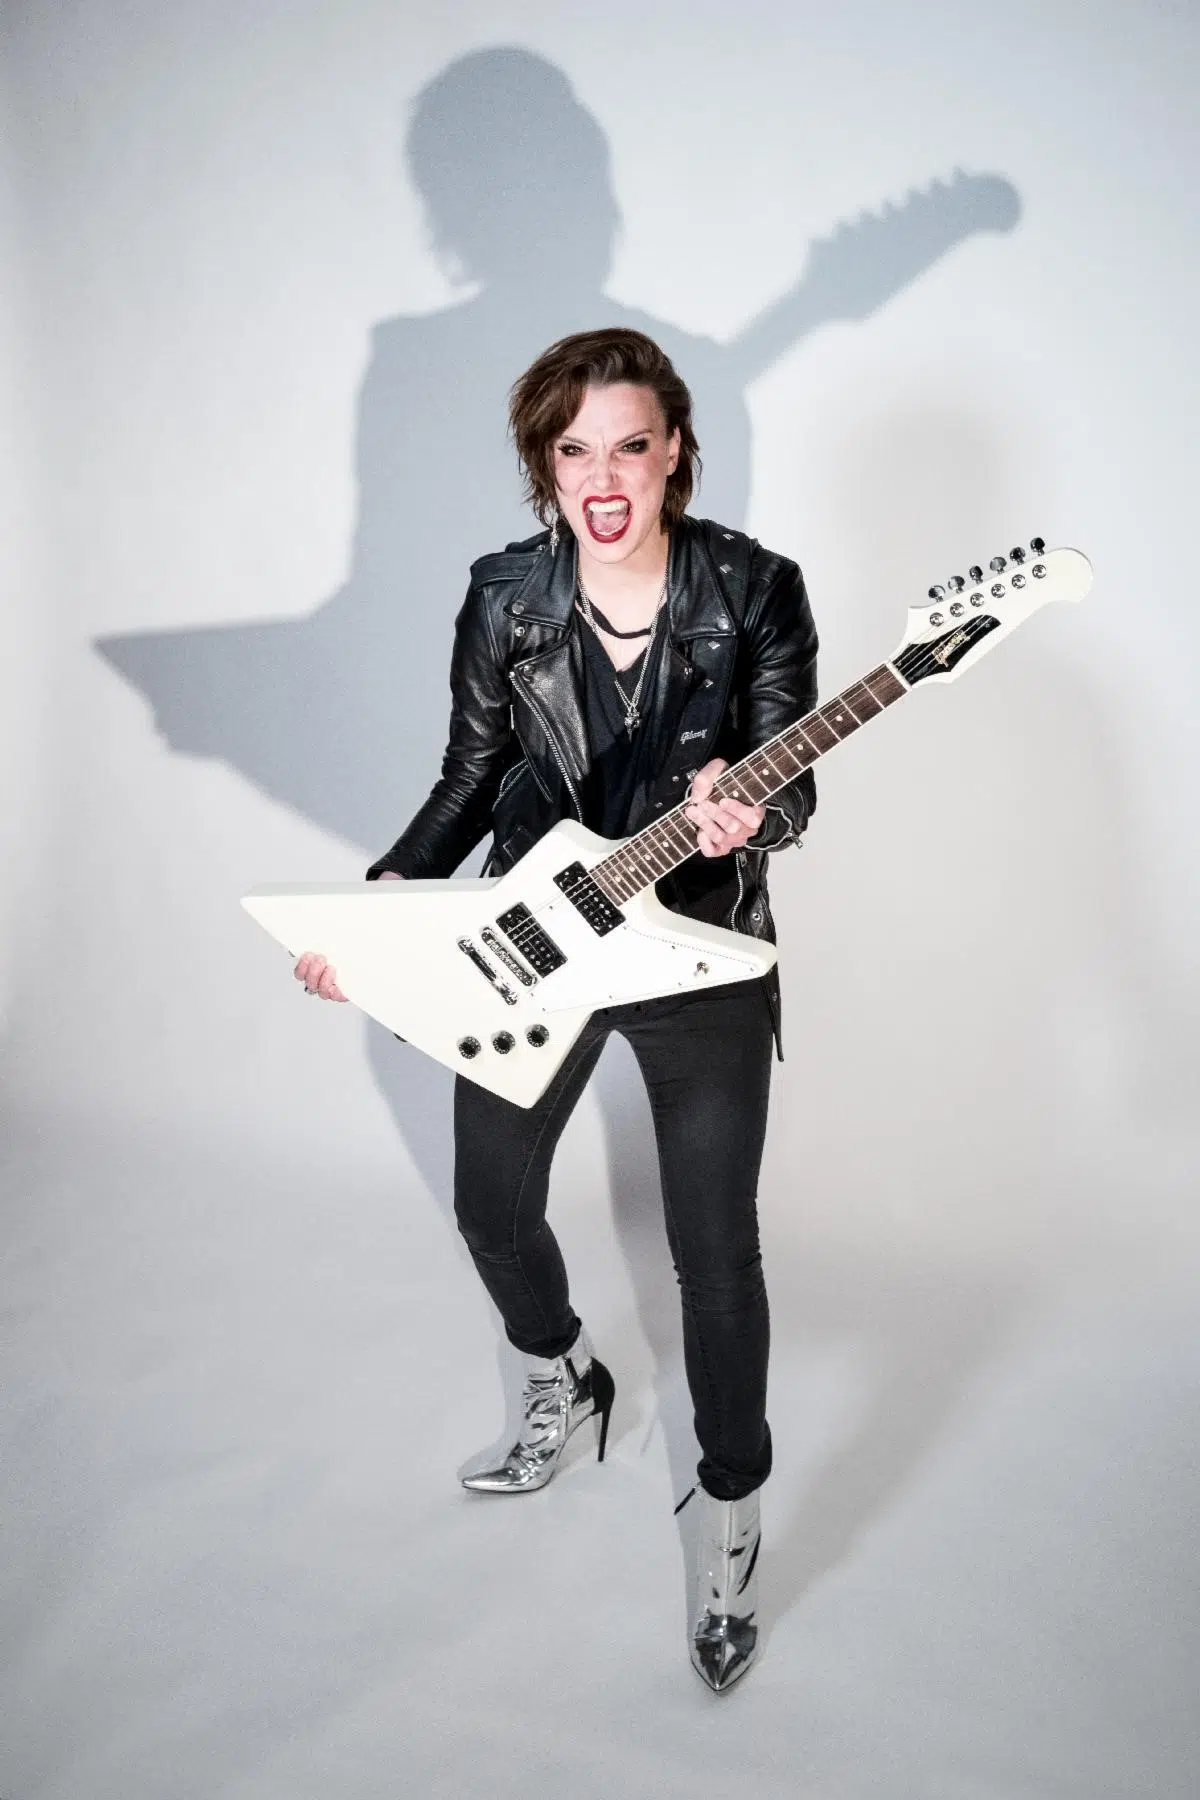 LZZY HALE IS A GIBSON AMBASSADOR